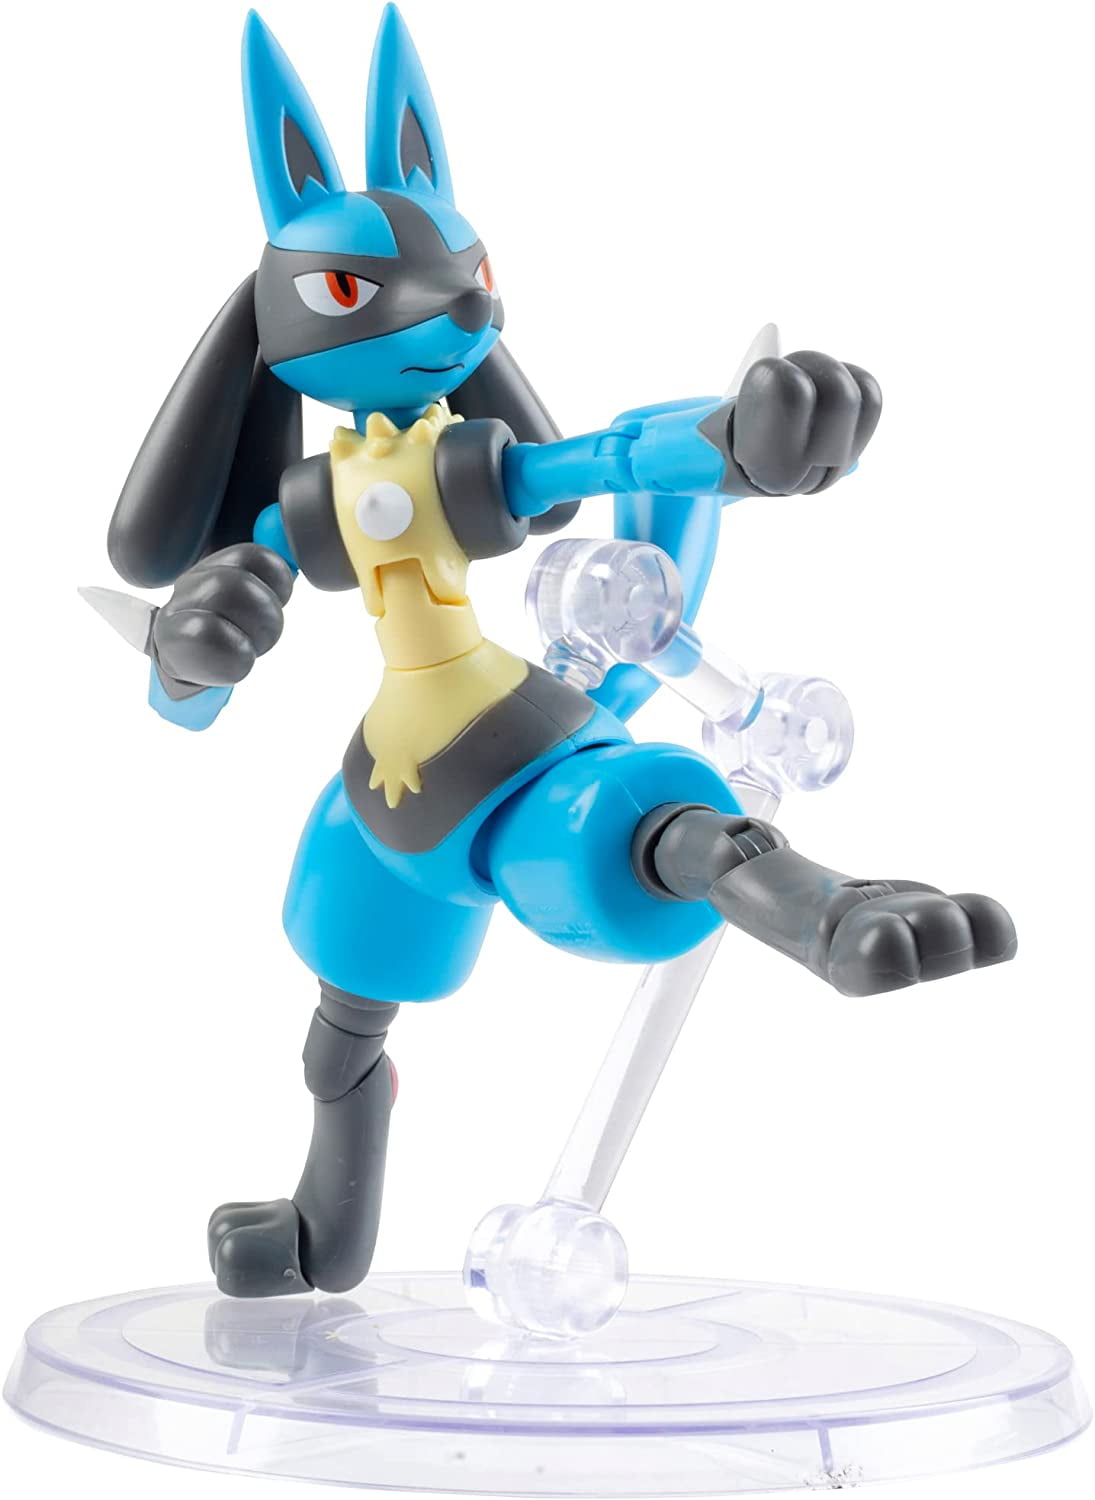 Pokemon 6 Lucario Articulated Battle Figure Toy with Display Stand -  Officially Licensed - Collectible Pokemon Gift for Kids and Adults - Ages 4+